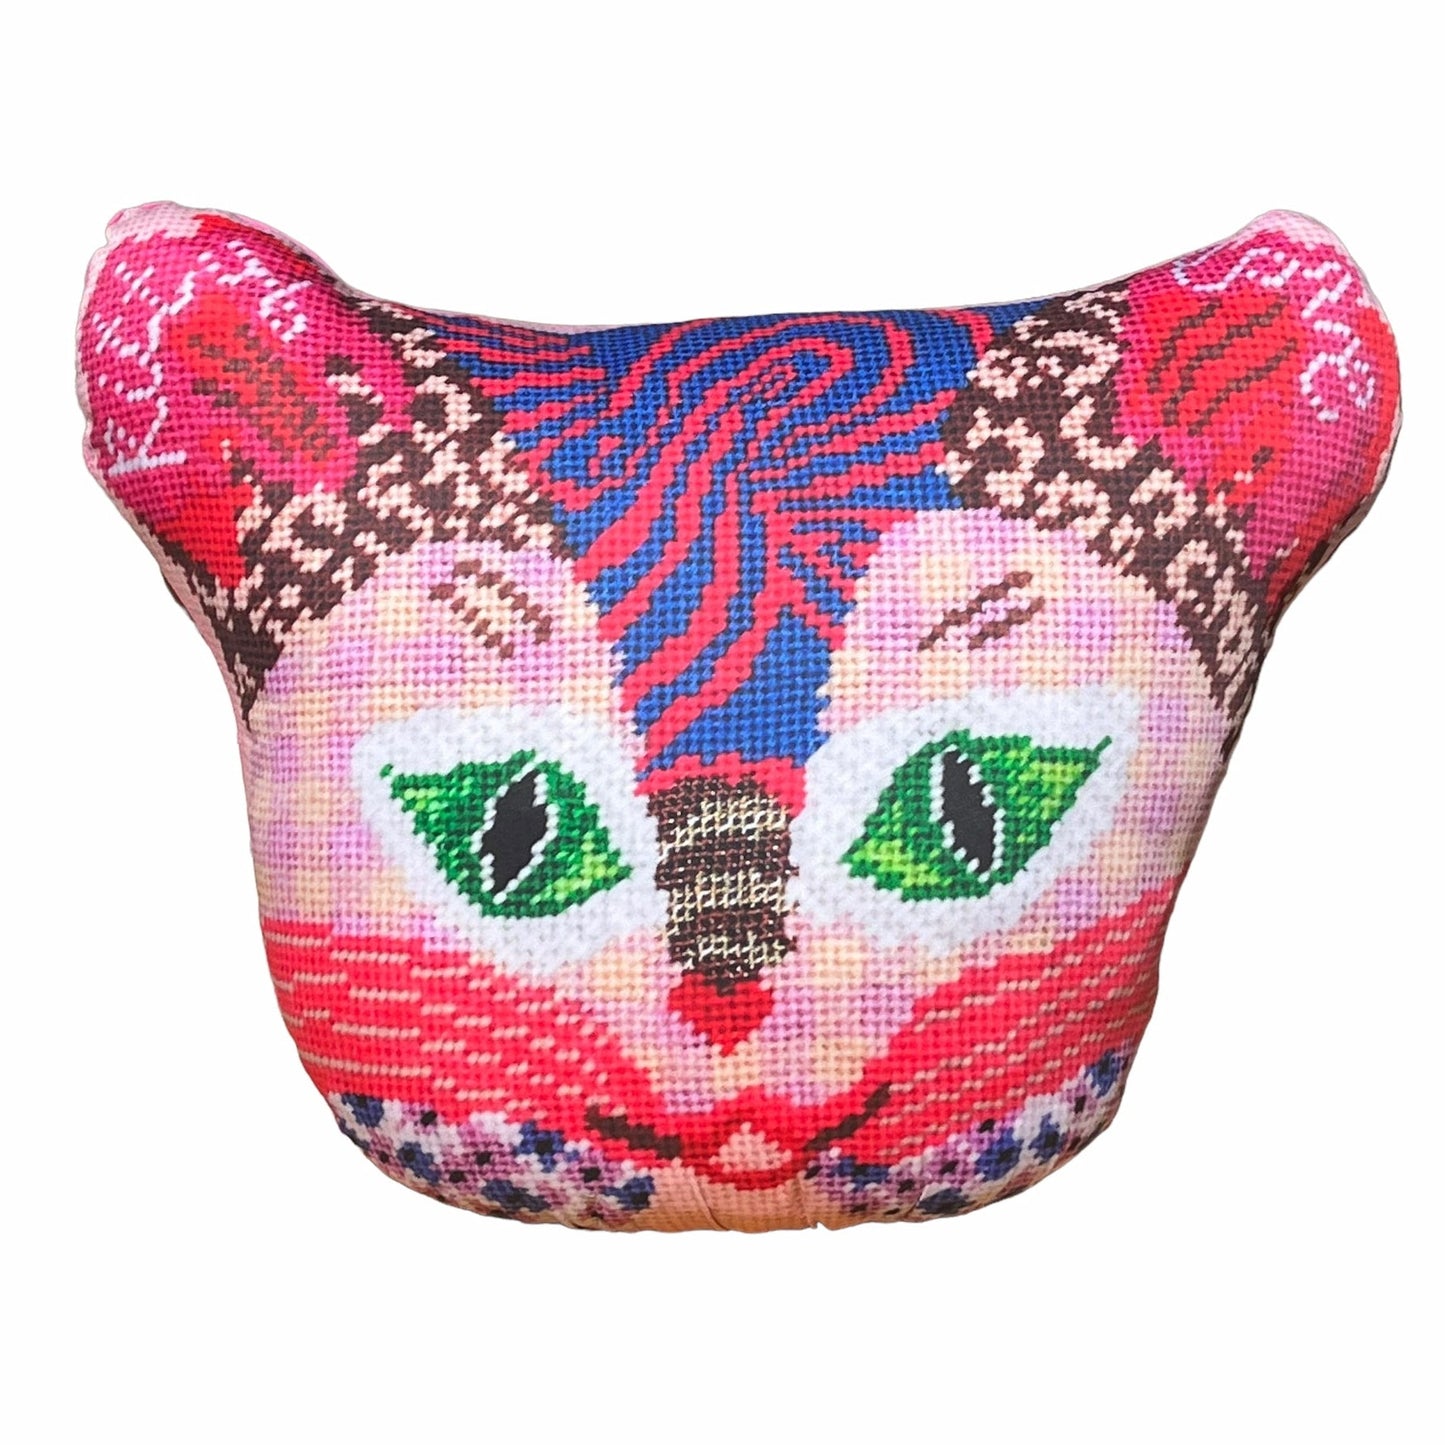 Multi-patterned sculpted cat in primarily pink and red colored with a checked face, swirls, leopard print , green eyes & flowers. Kitty Love is written on the ears.